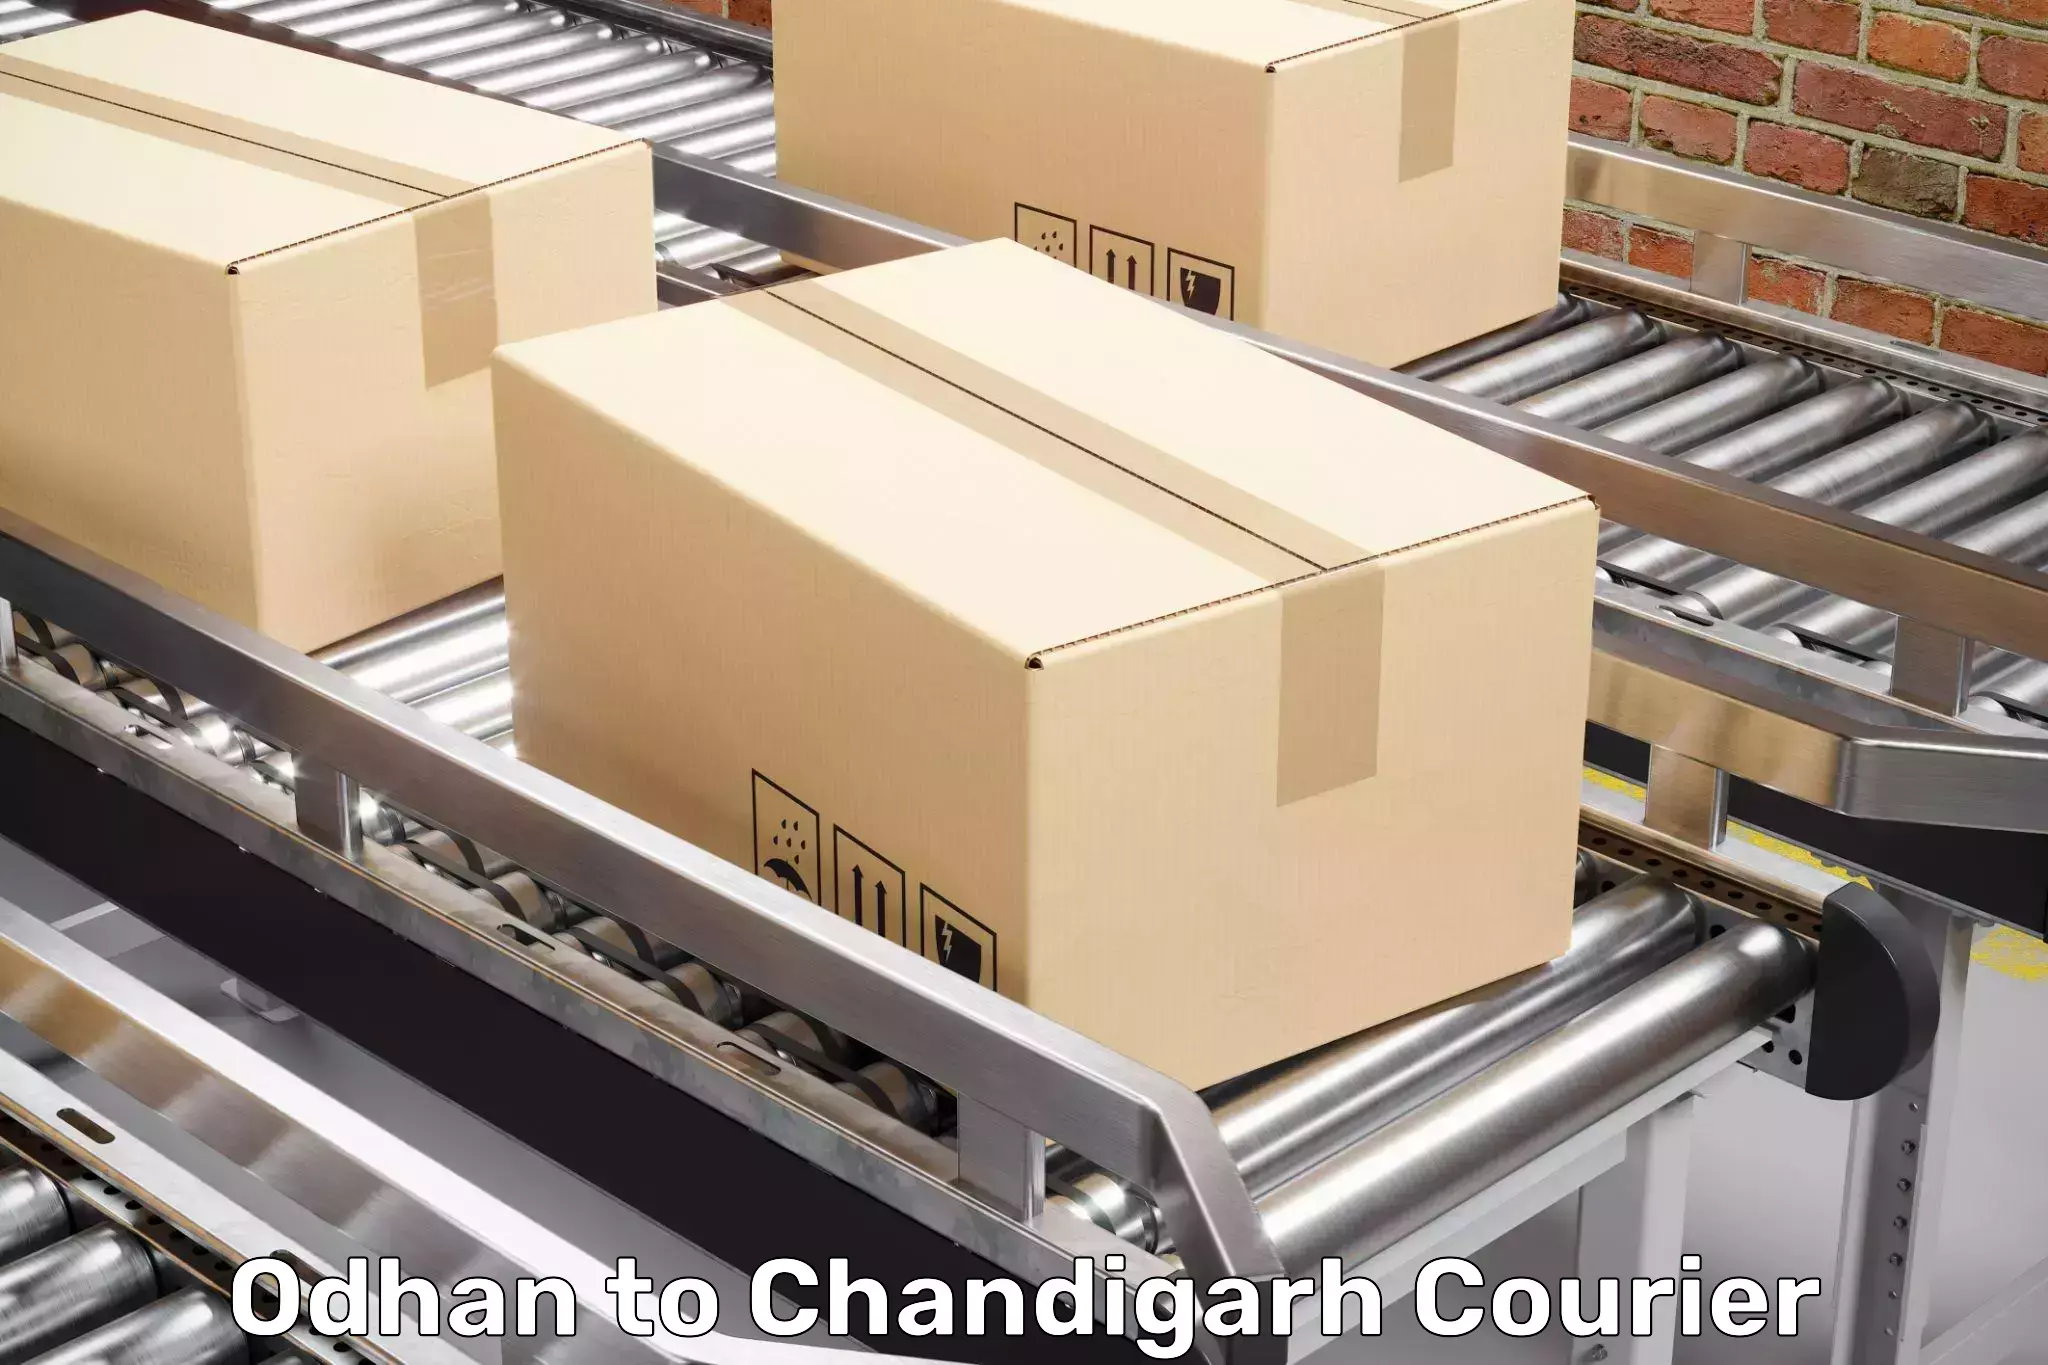 Furniture delivery service Odhan to Panjab University Chandigarh